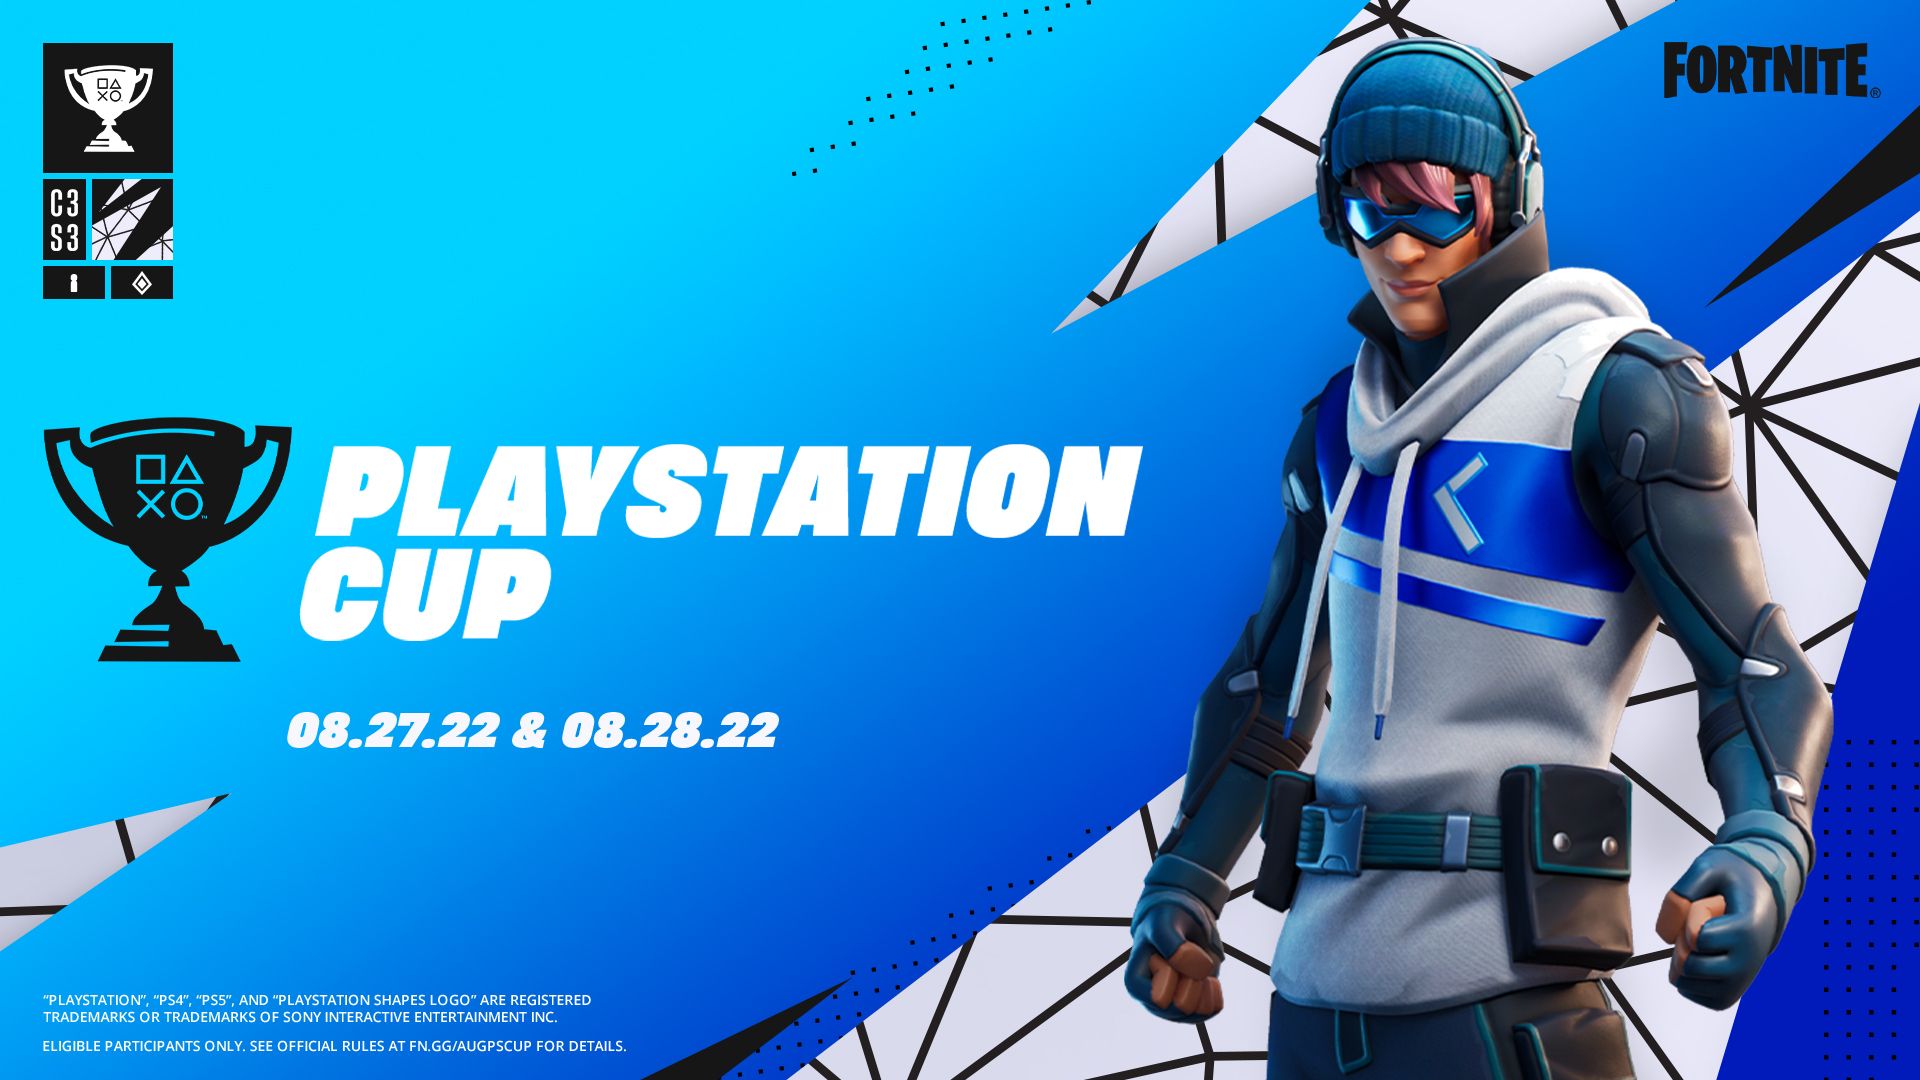 Fortnite 100k+ PlayStation Cup August 2022 Dates, Qualifiers & Free Spray Fortnite Tracker